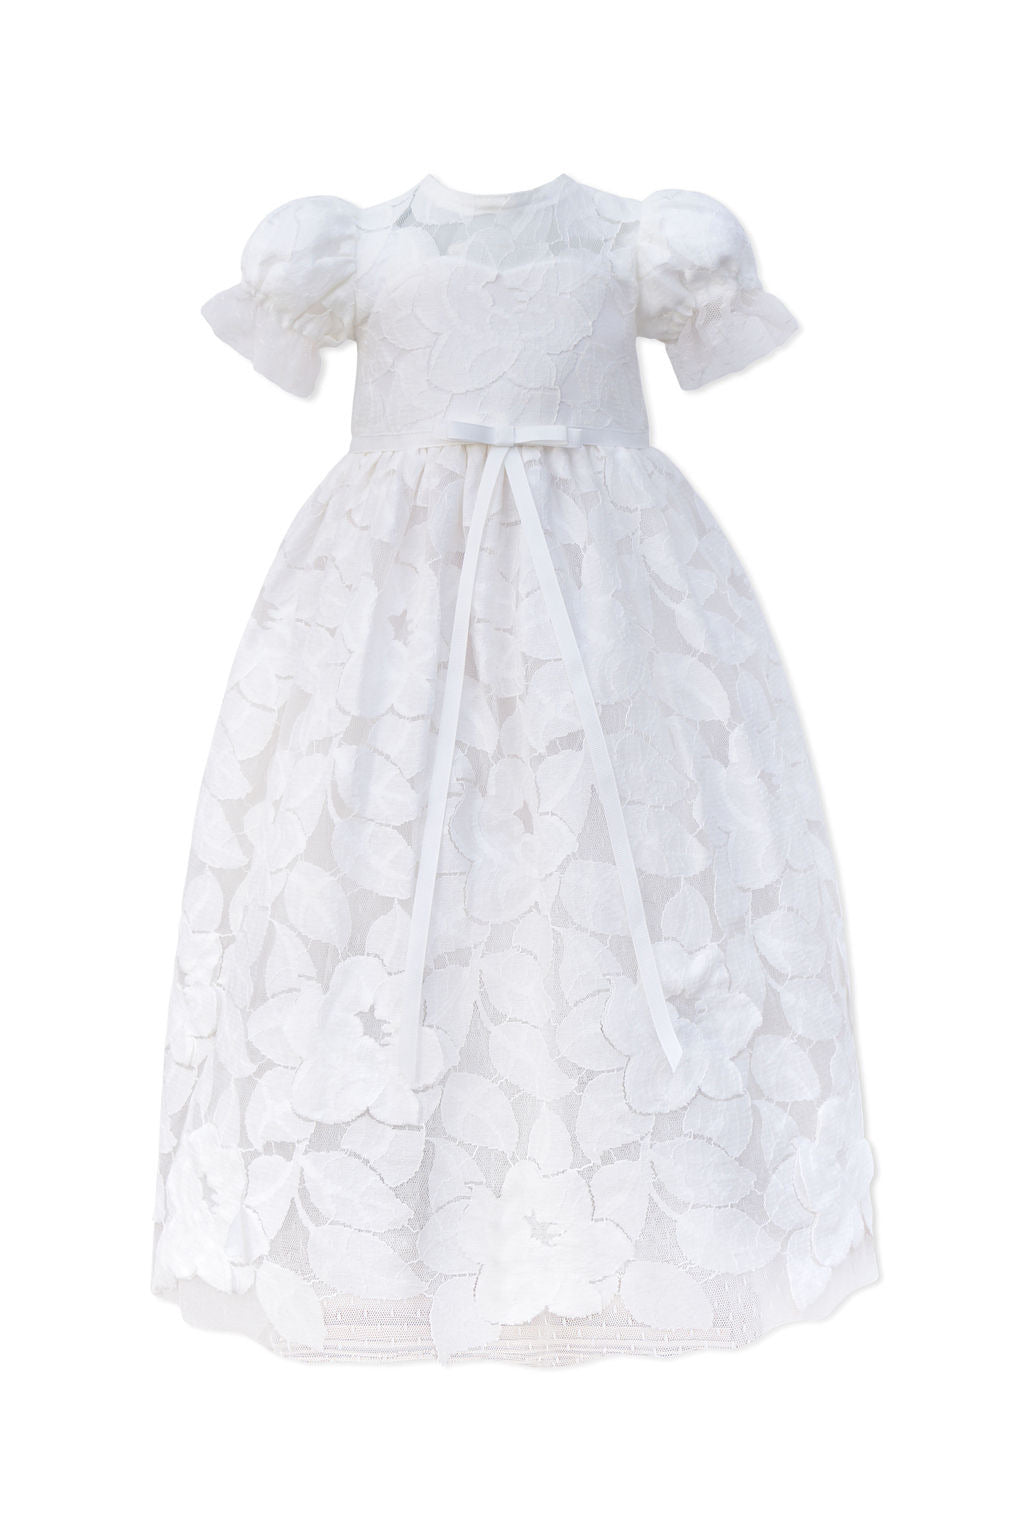 The Baby Girl Ceremony Gown